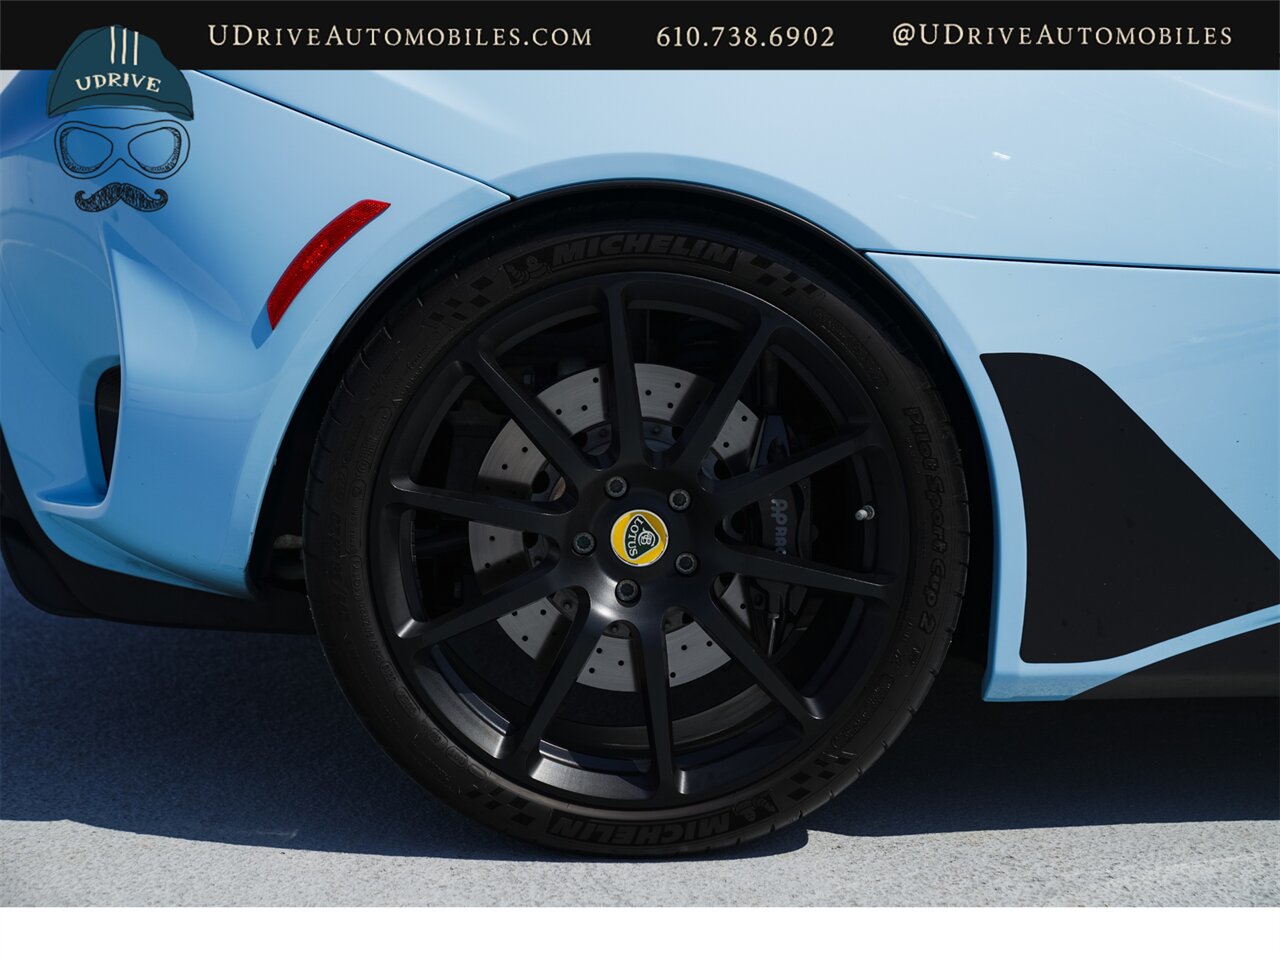 2020 Lotus Evora GT 2+2  6 Speed Manual Sky Blue Bespoke Stitching - Photo 56 - West Chester, PA 19382